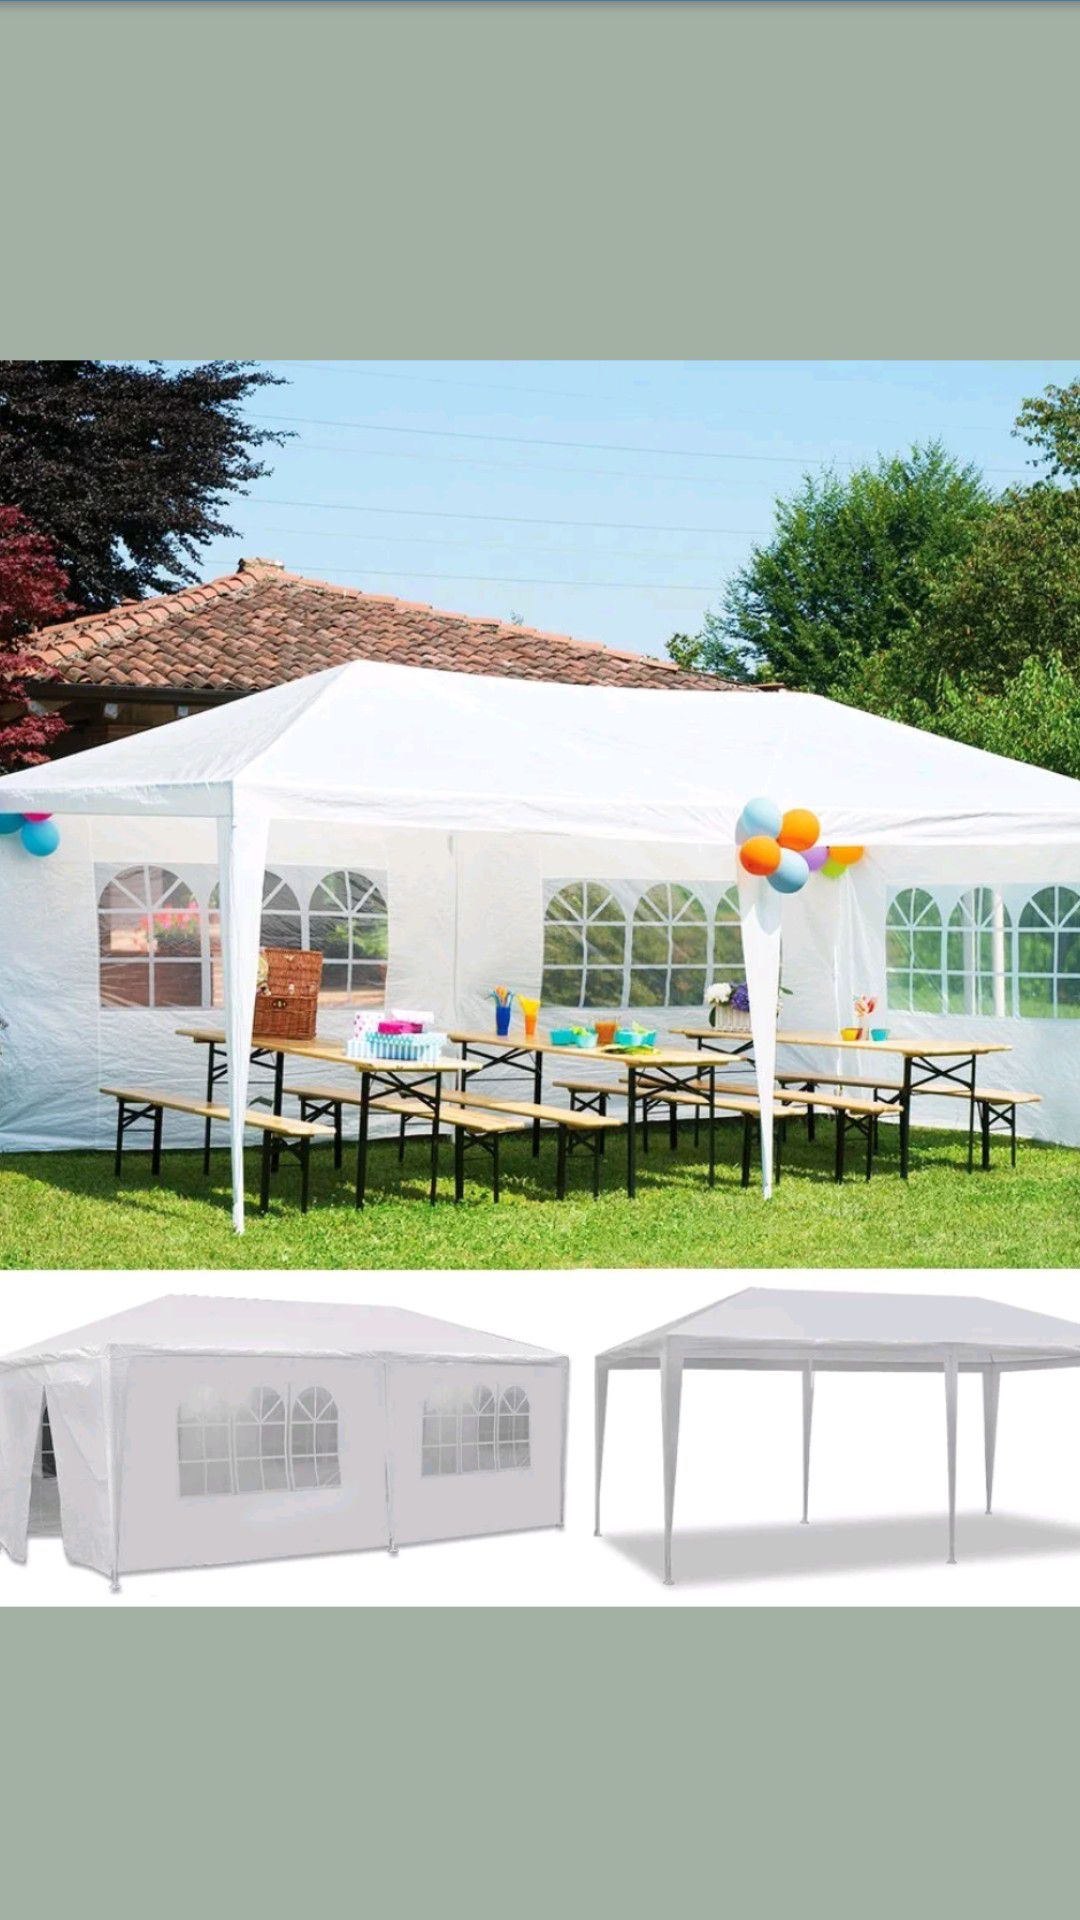 BRAND NEW CANAPI TENT 10X20 COMES WITH 6 REMOVABLE WALL